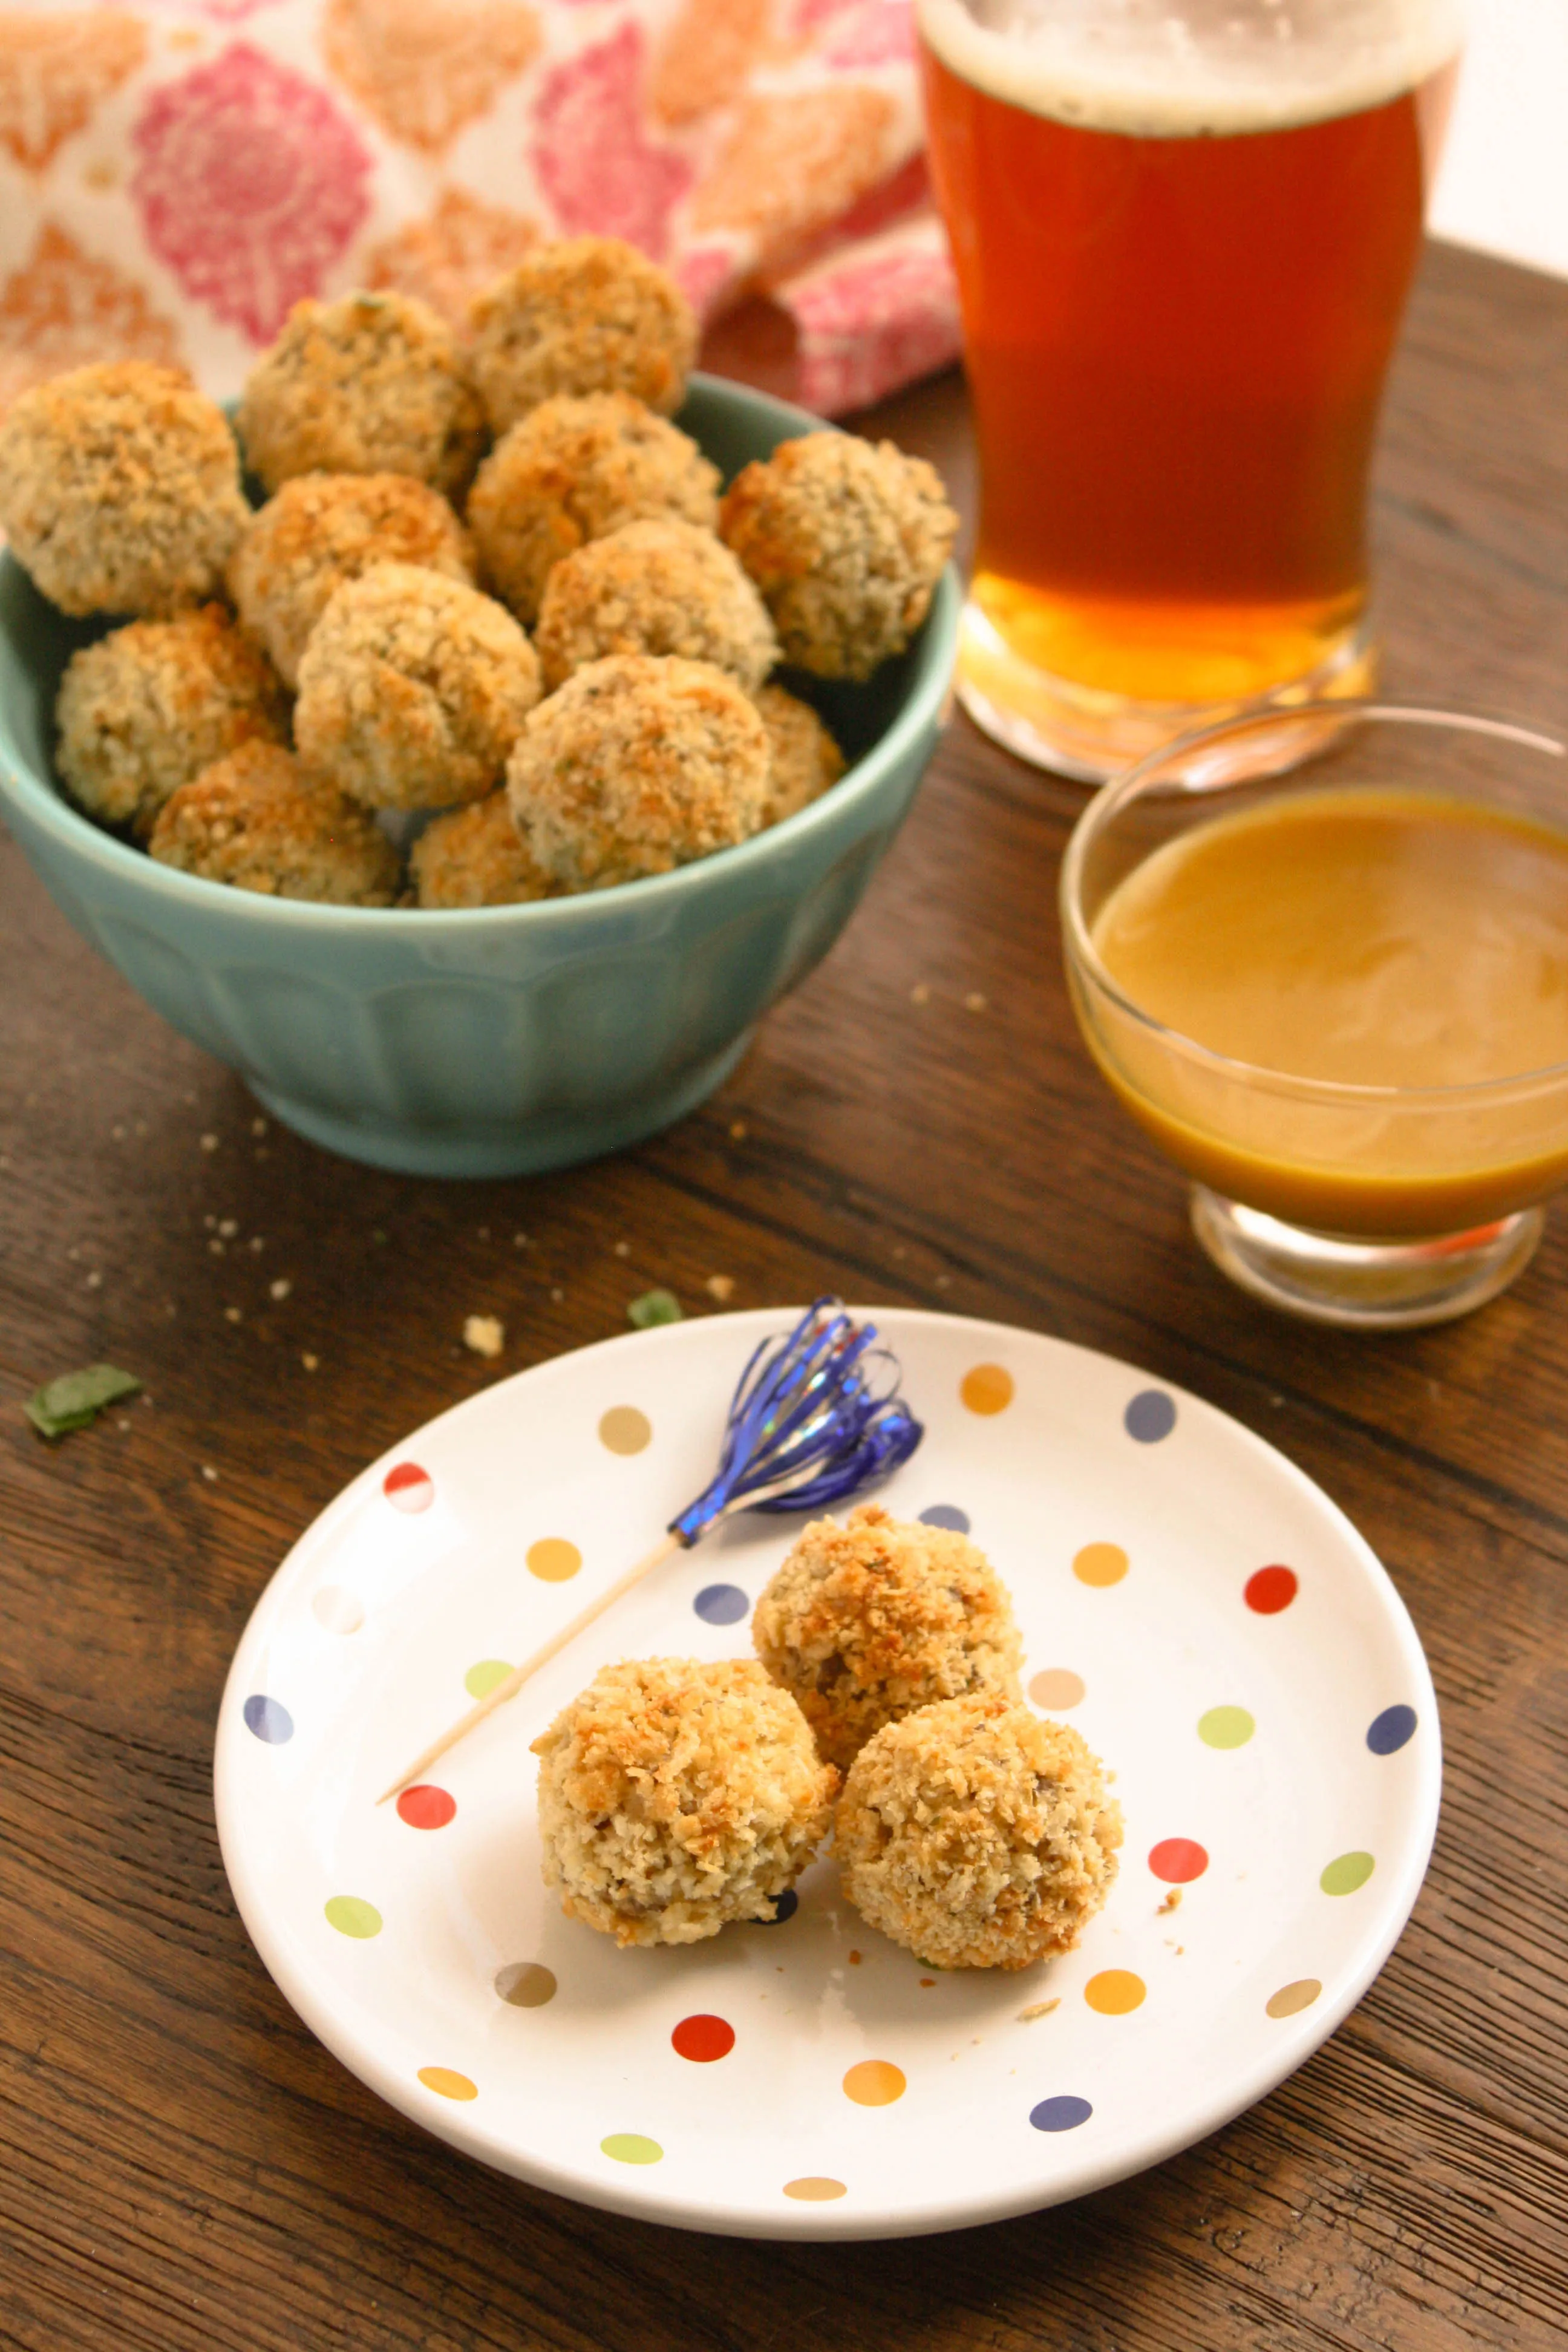 Baked Sauerkraut Balls are a delight! Perfect for a party this baked (not fried) appetizer is so good!